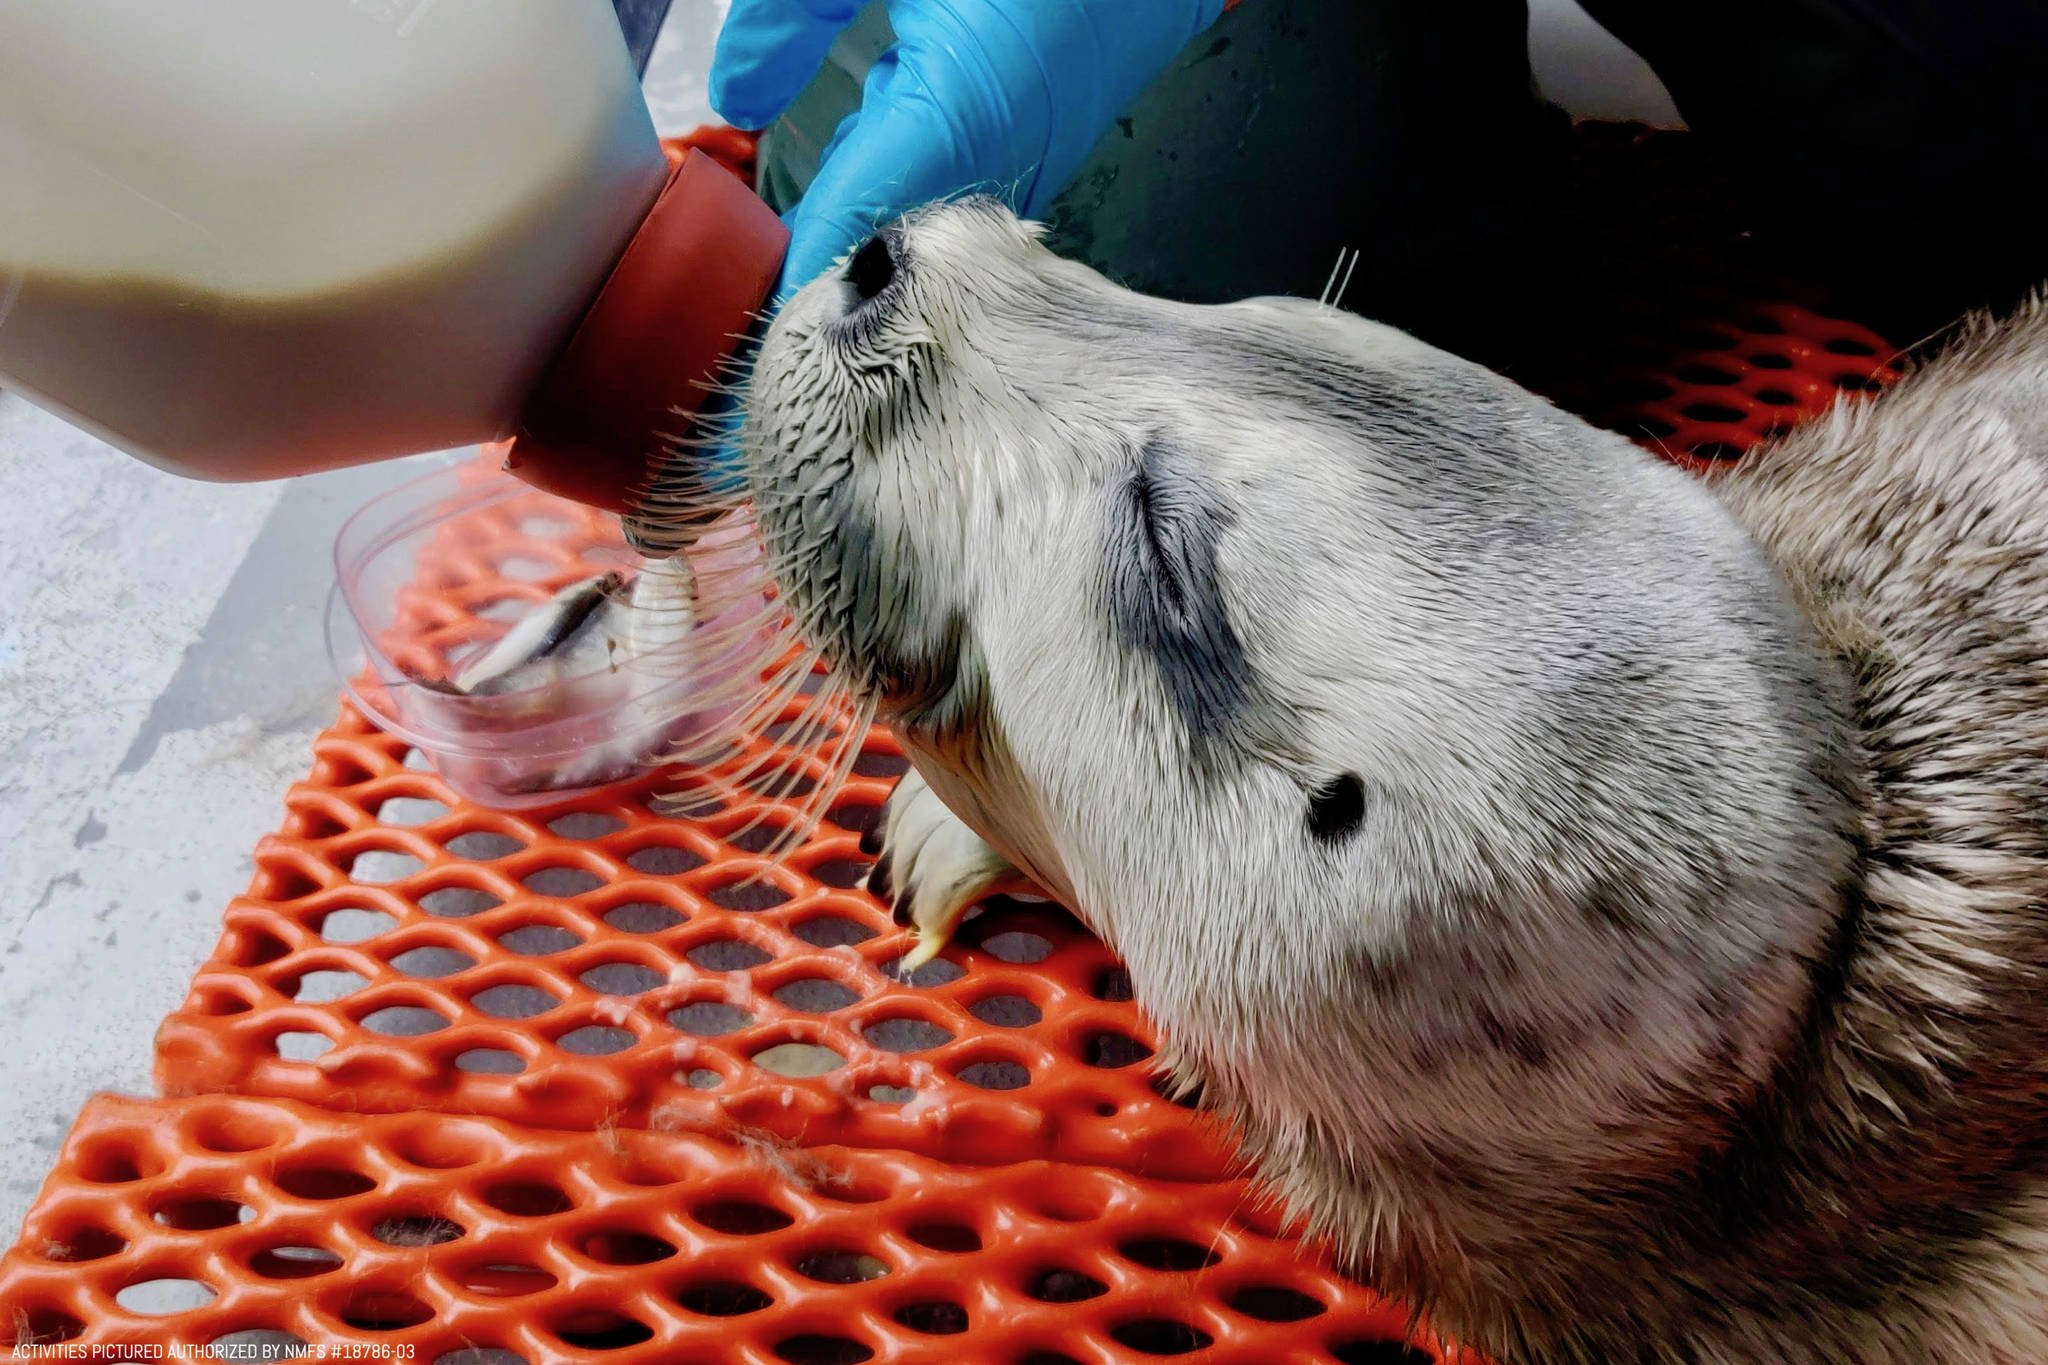 Staff from the Alaska SeaLife Center in Seward, Alaska feed a newborn bearded seal pup that was rescued on April 13, 2019 in this undated photo. (Photo courtesy of Chloe Rossman/Alaska SeaLife Center)